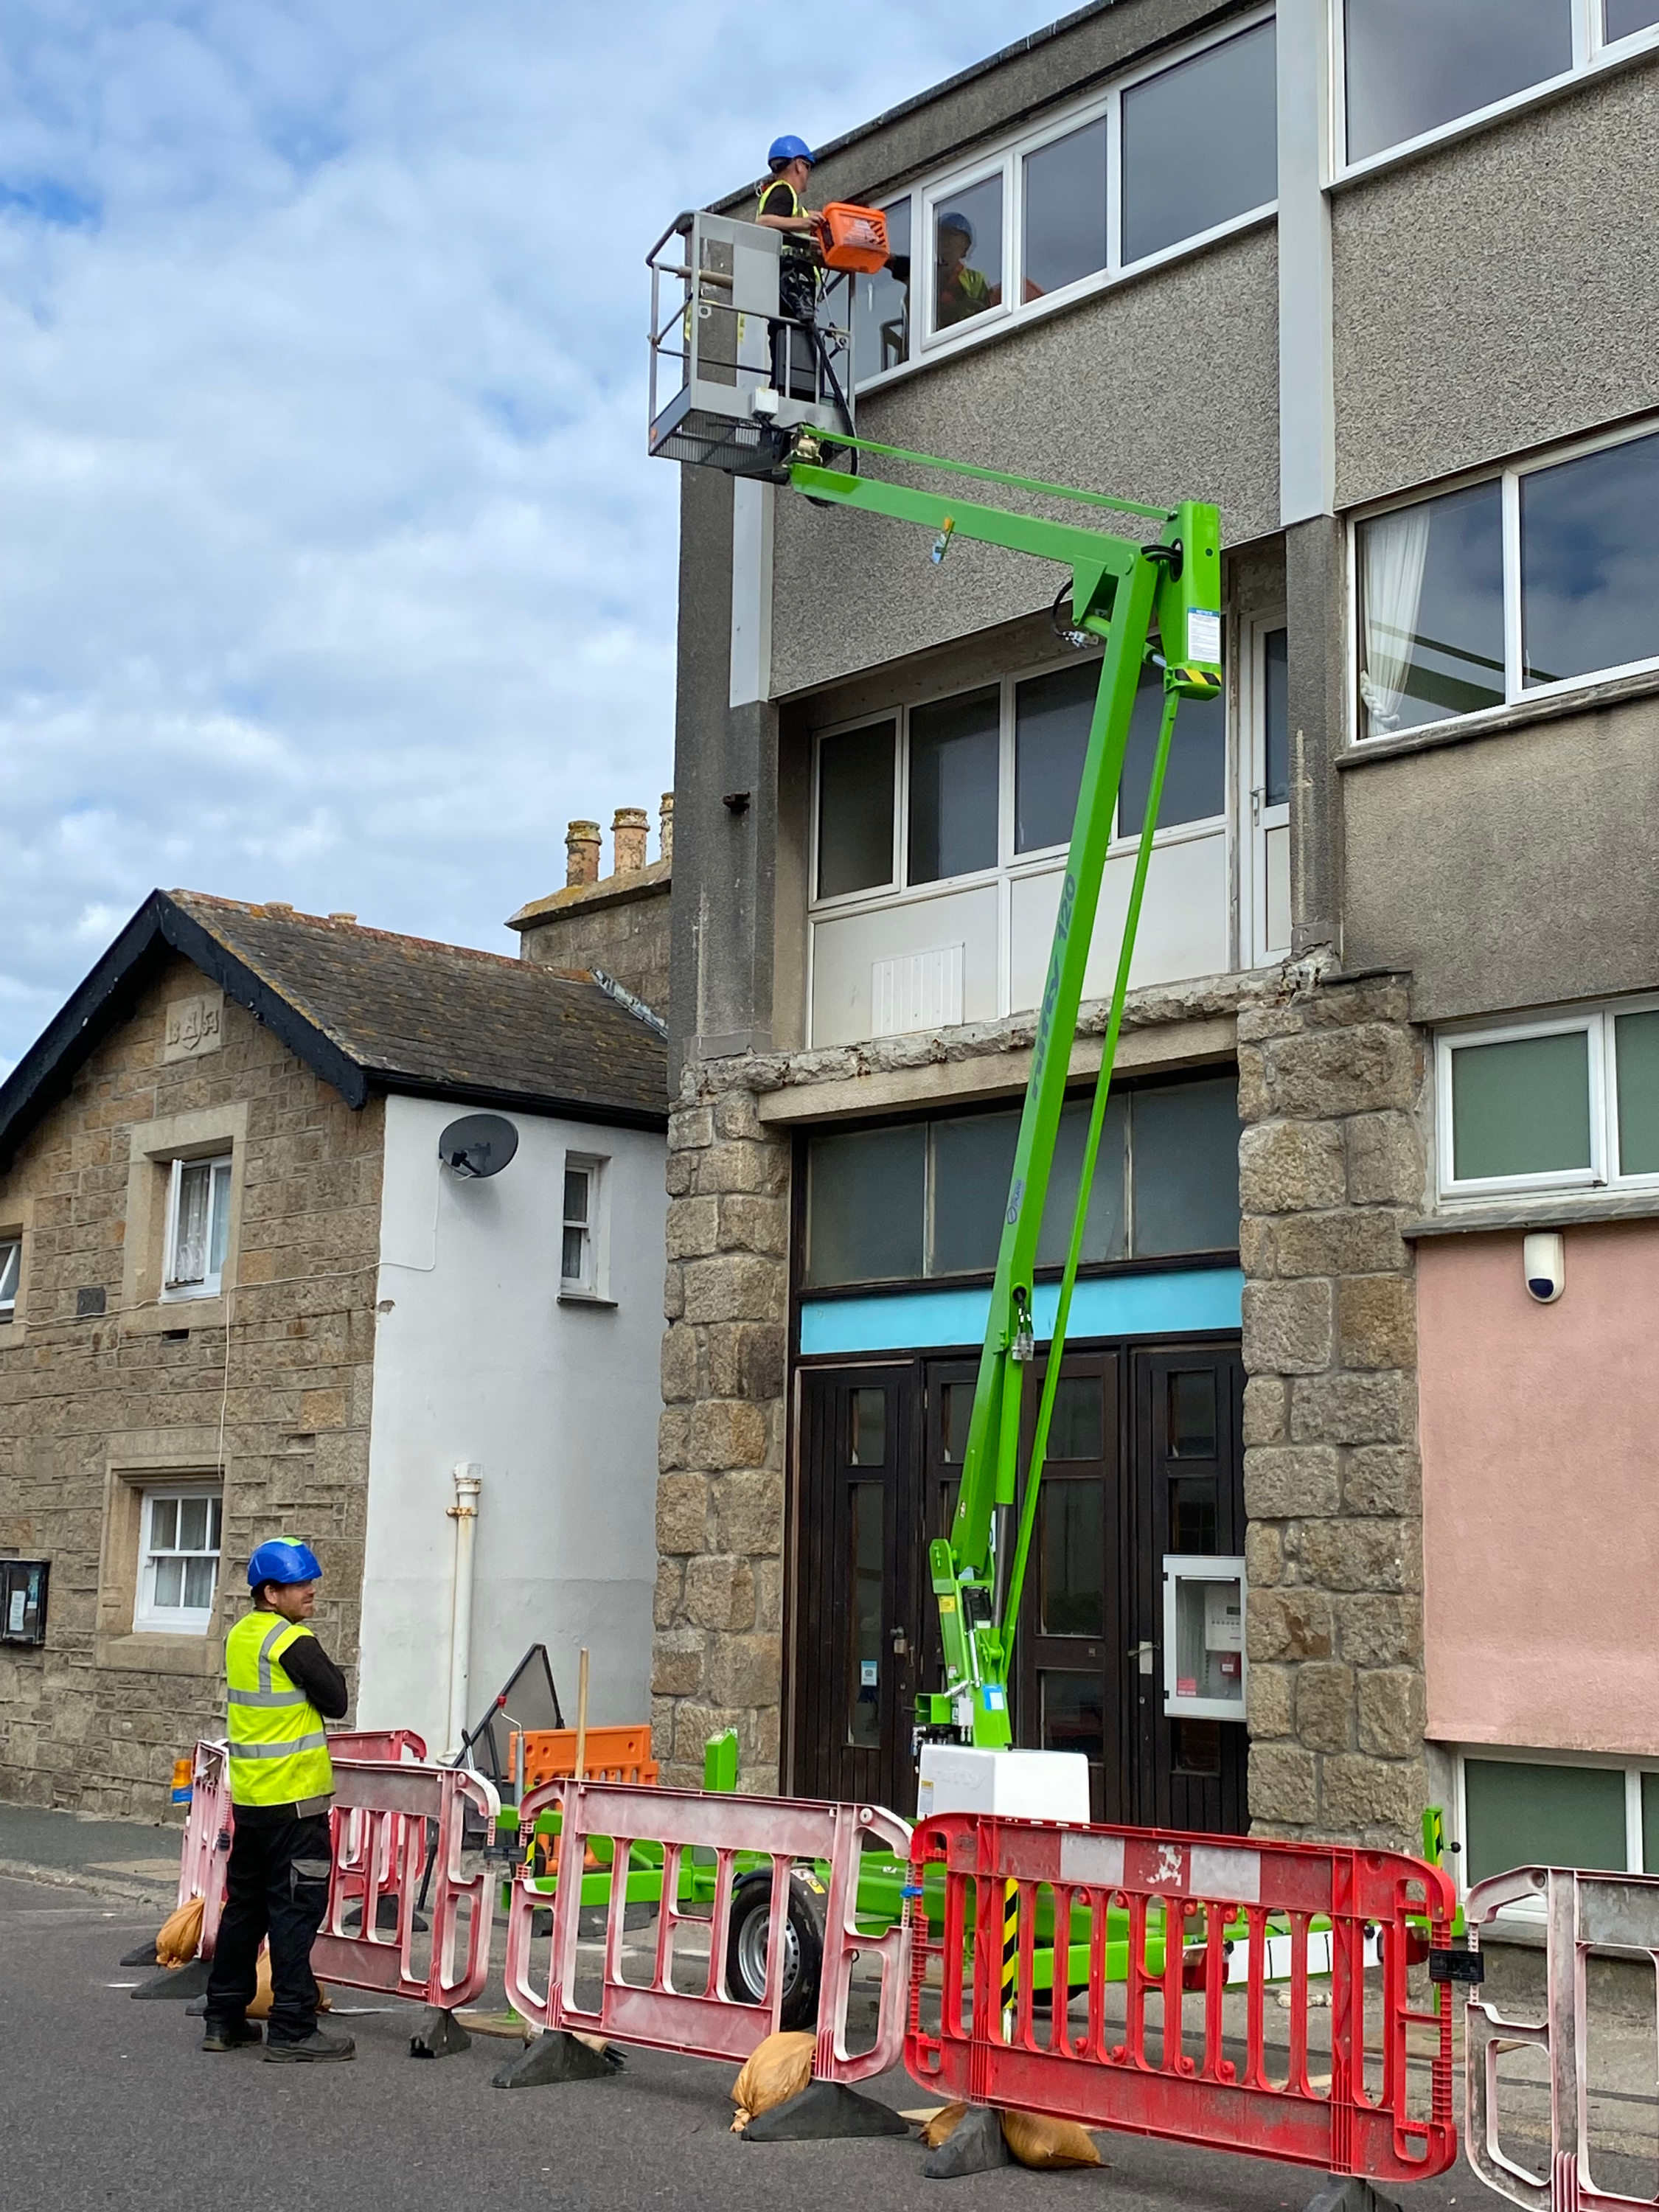 Council employees carrying out work on the site of the old museum using a cherry picker.